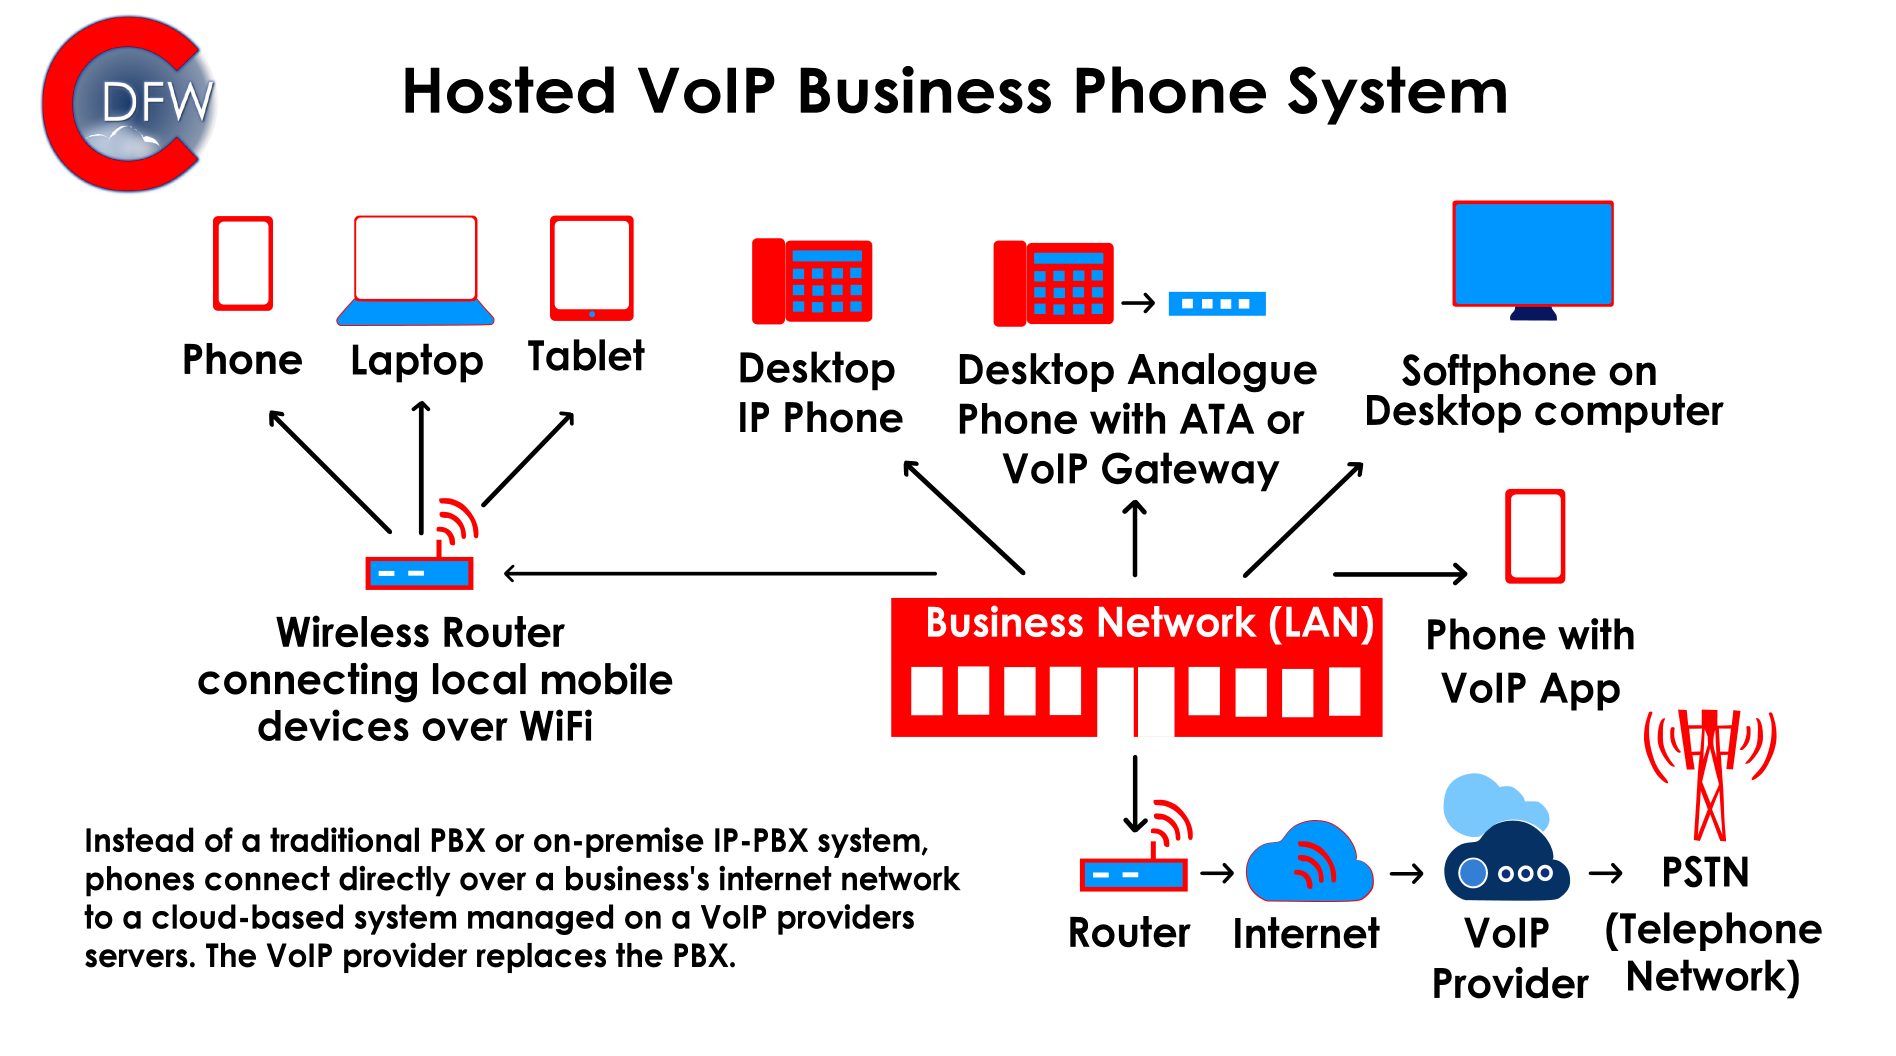 Diagram shows VoIP architecture and the different aspects